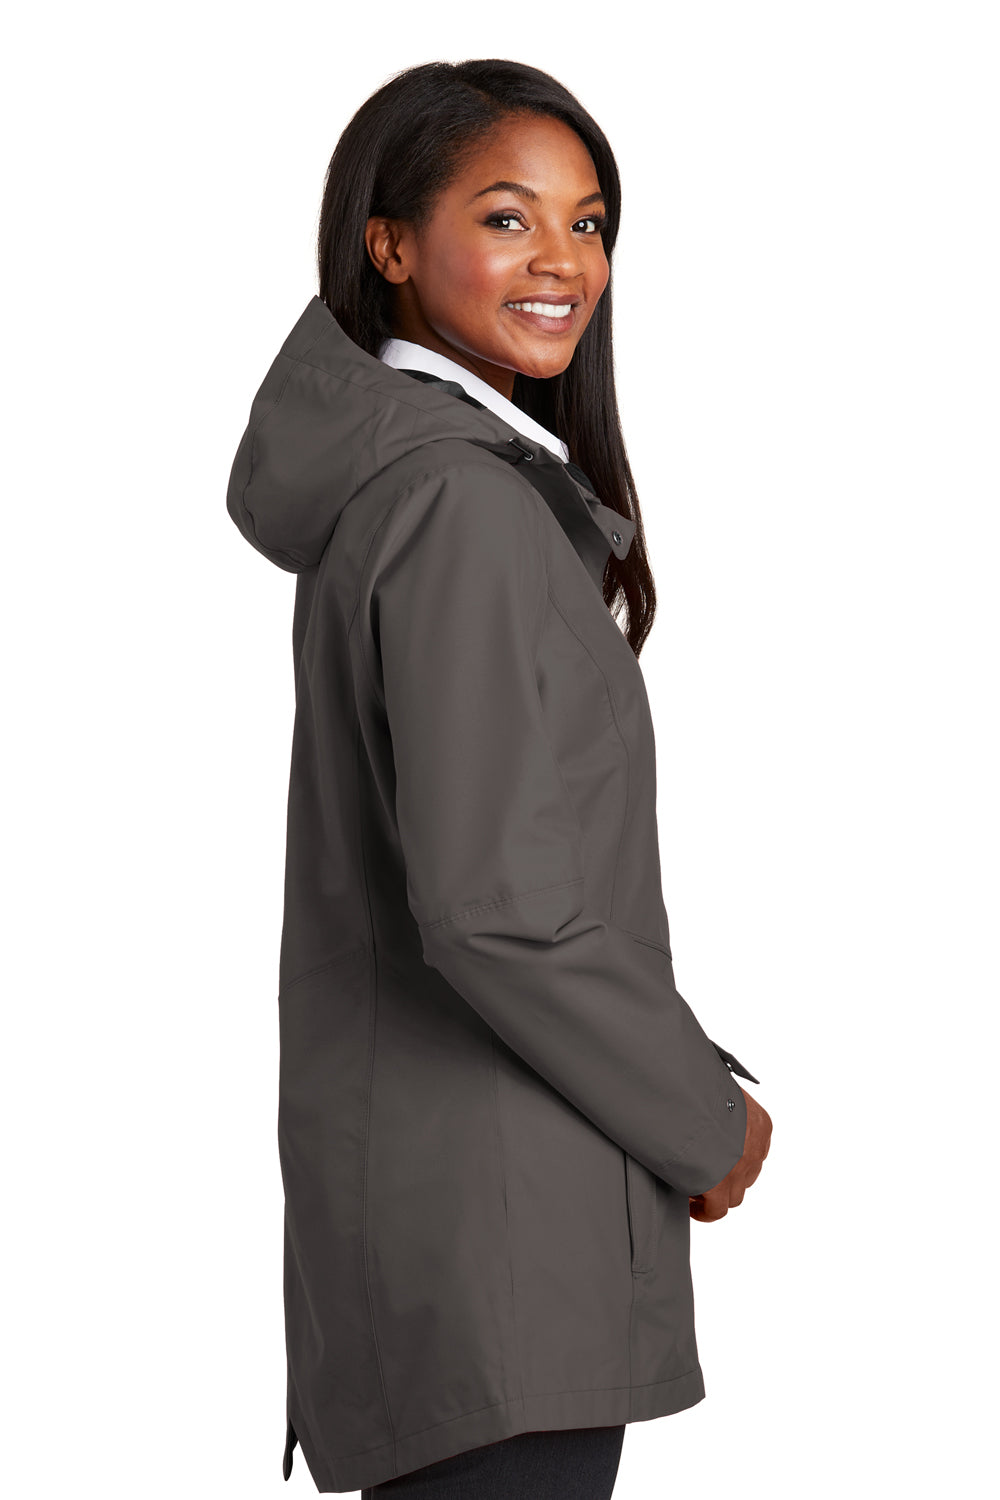 Port Authority L900 Womens Collective Waterproof Full Zip Hooded Jacket Graphite Grey Side